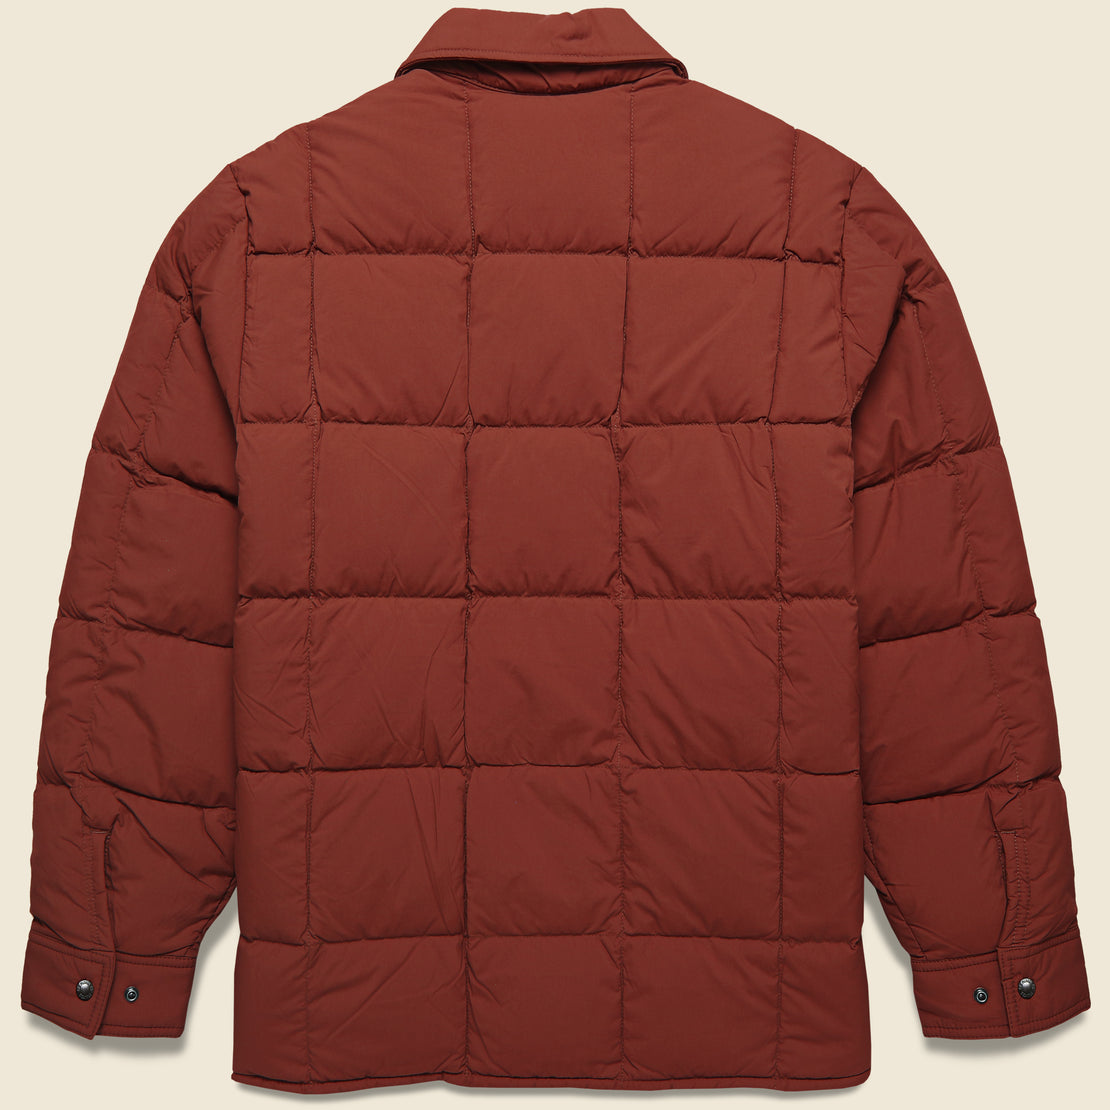 Lightweight Down Jac Shirt - Madder Red - Filson - STAG Provisions - Outerwear - Coat / Jacket